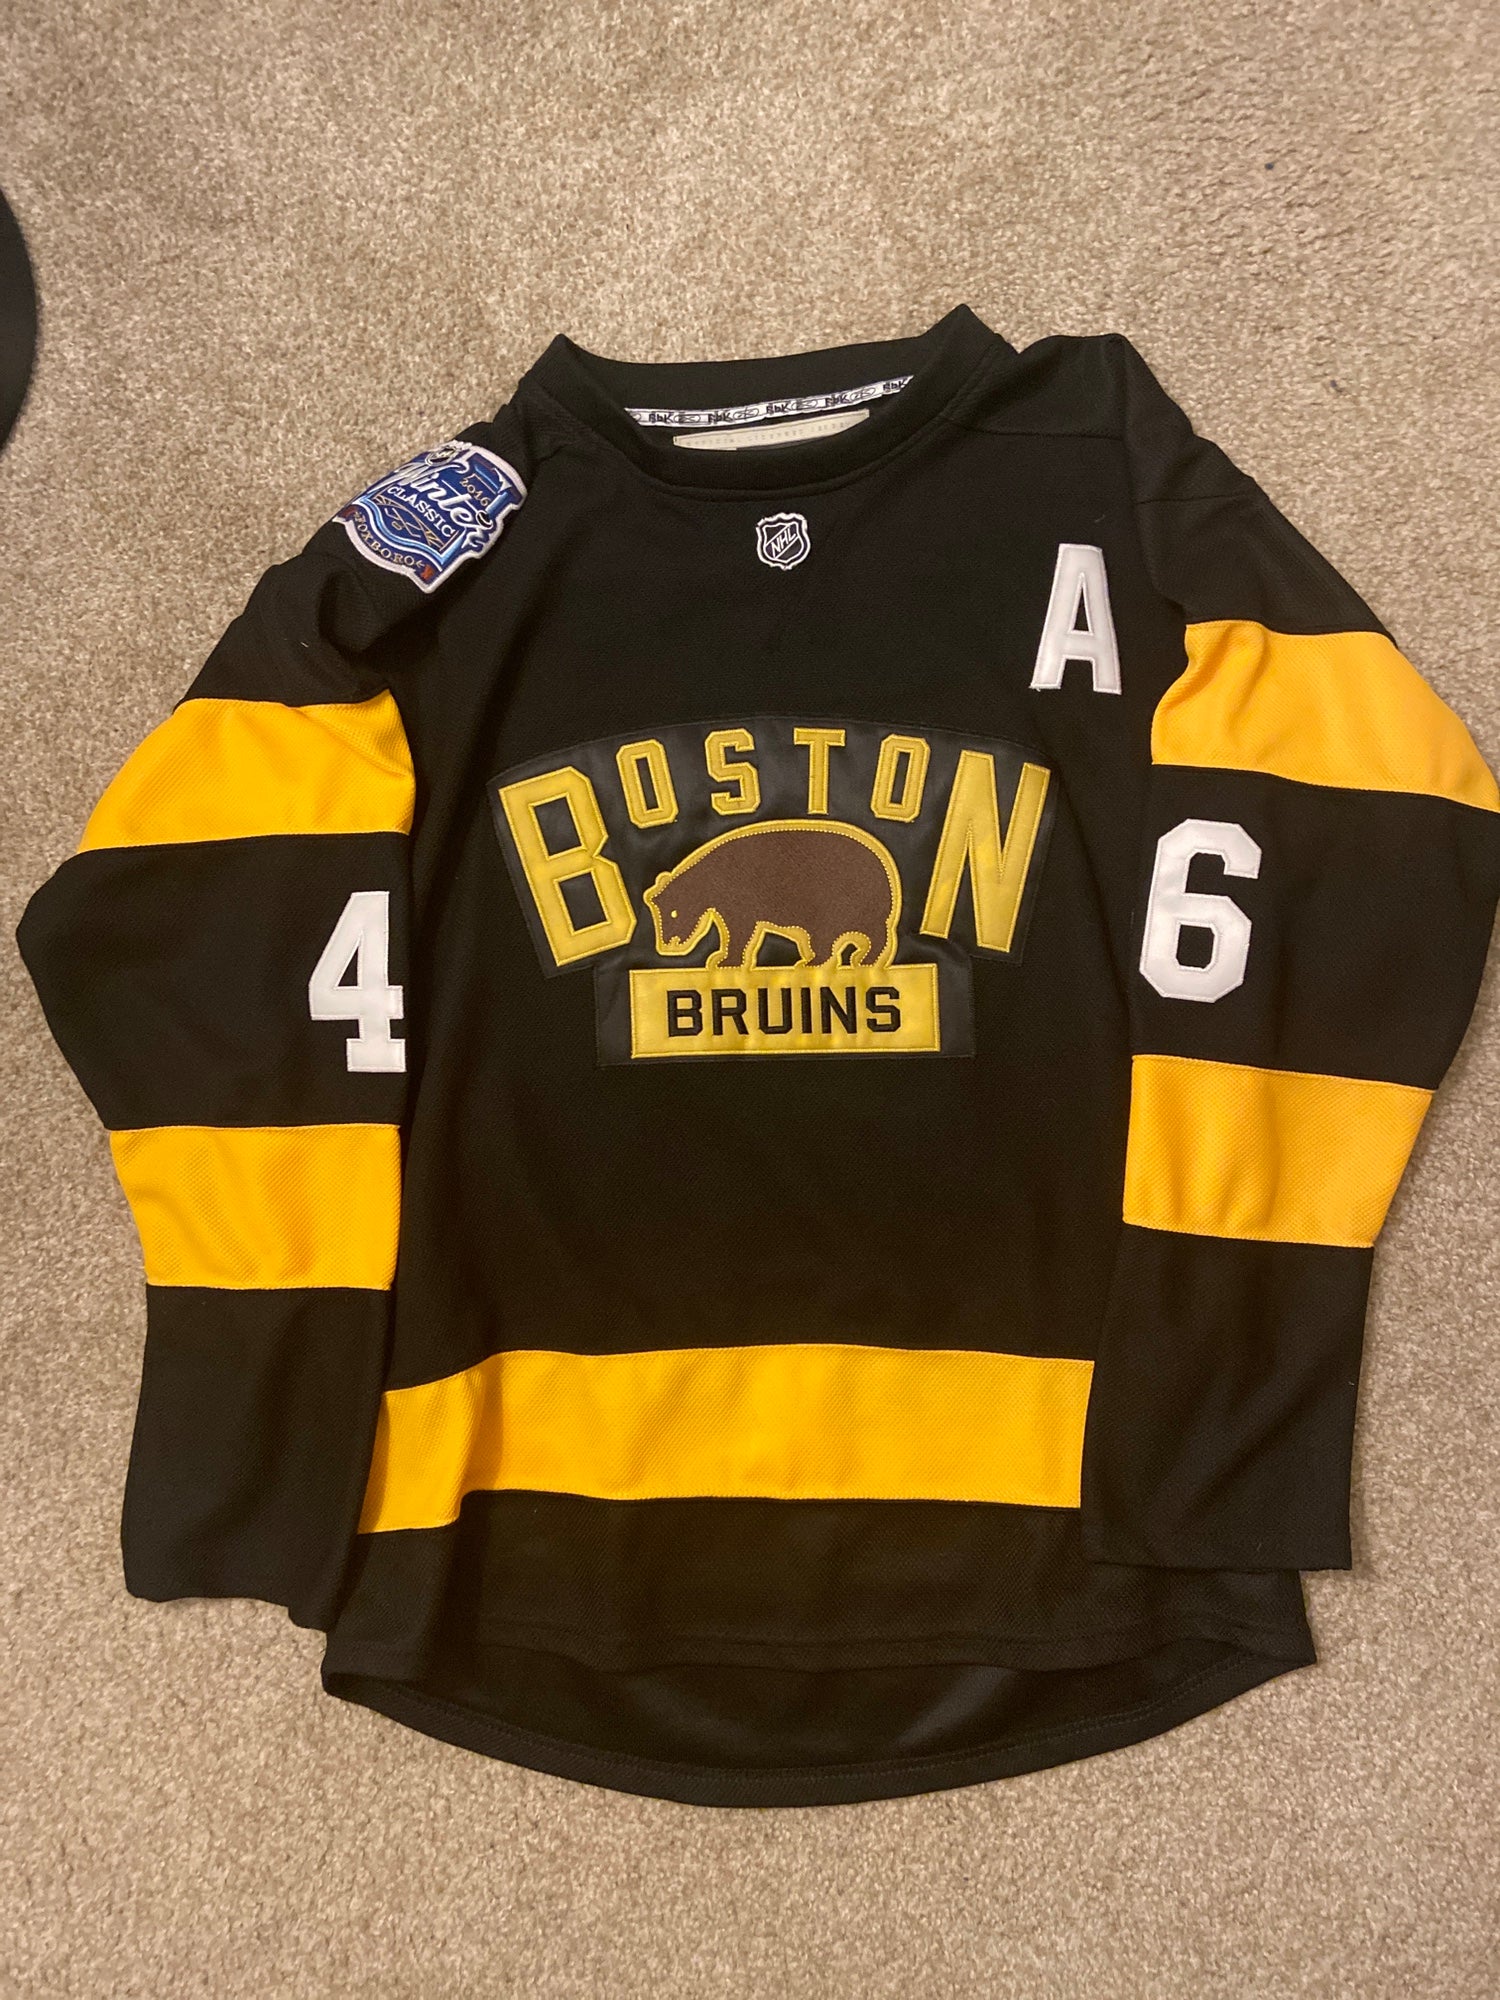 Winter Classic 2016: What jersey should the Bruins wear? - Stanley